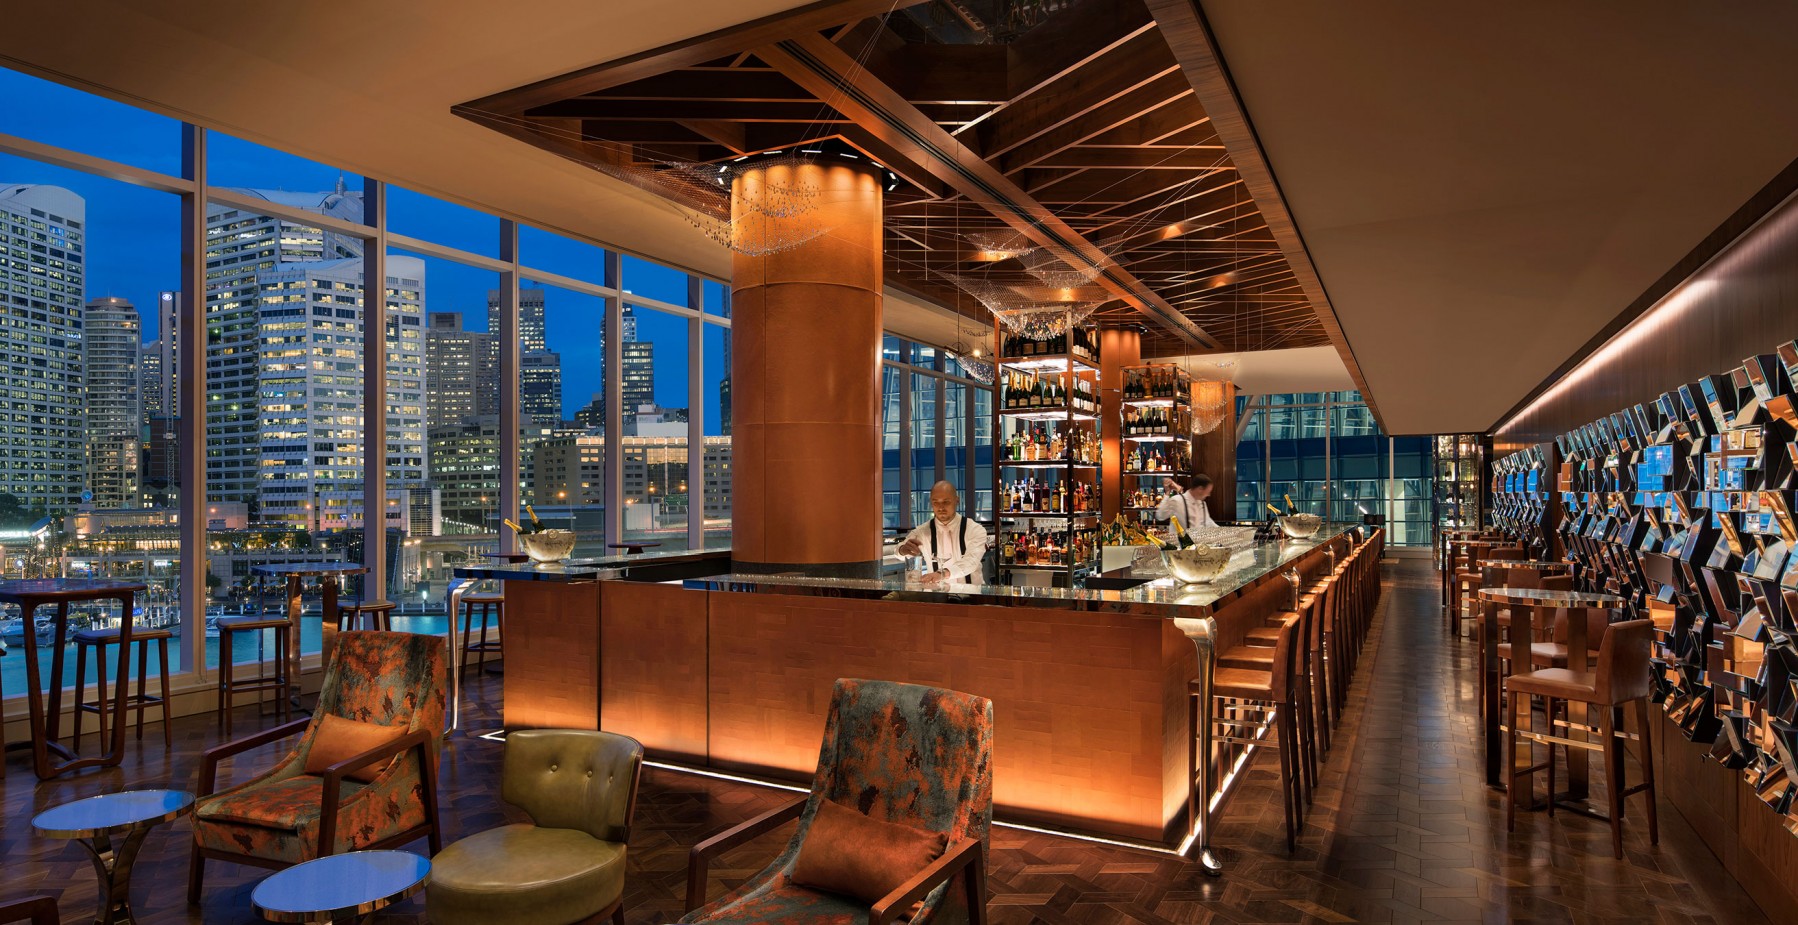 Champagne Bar at the Sofitel Sydney Darling Harbour. Click to enlarge.